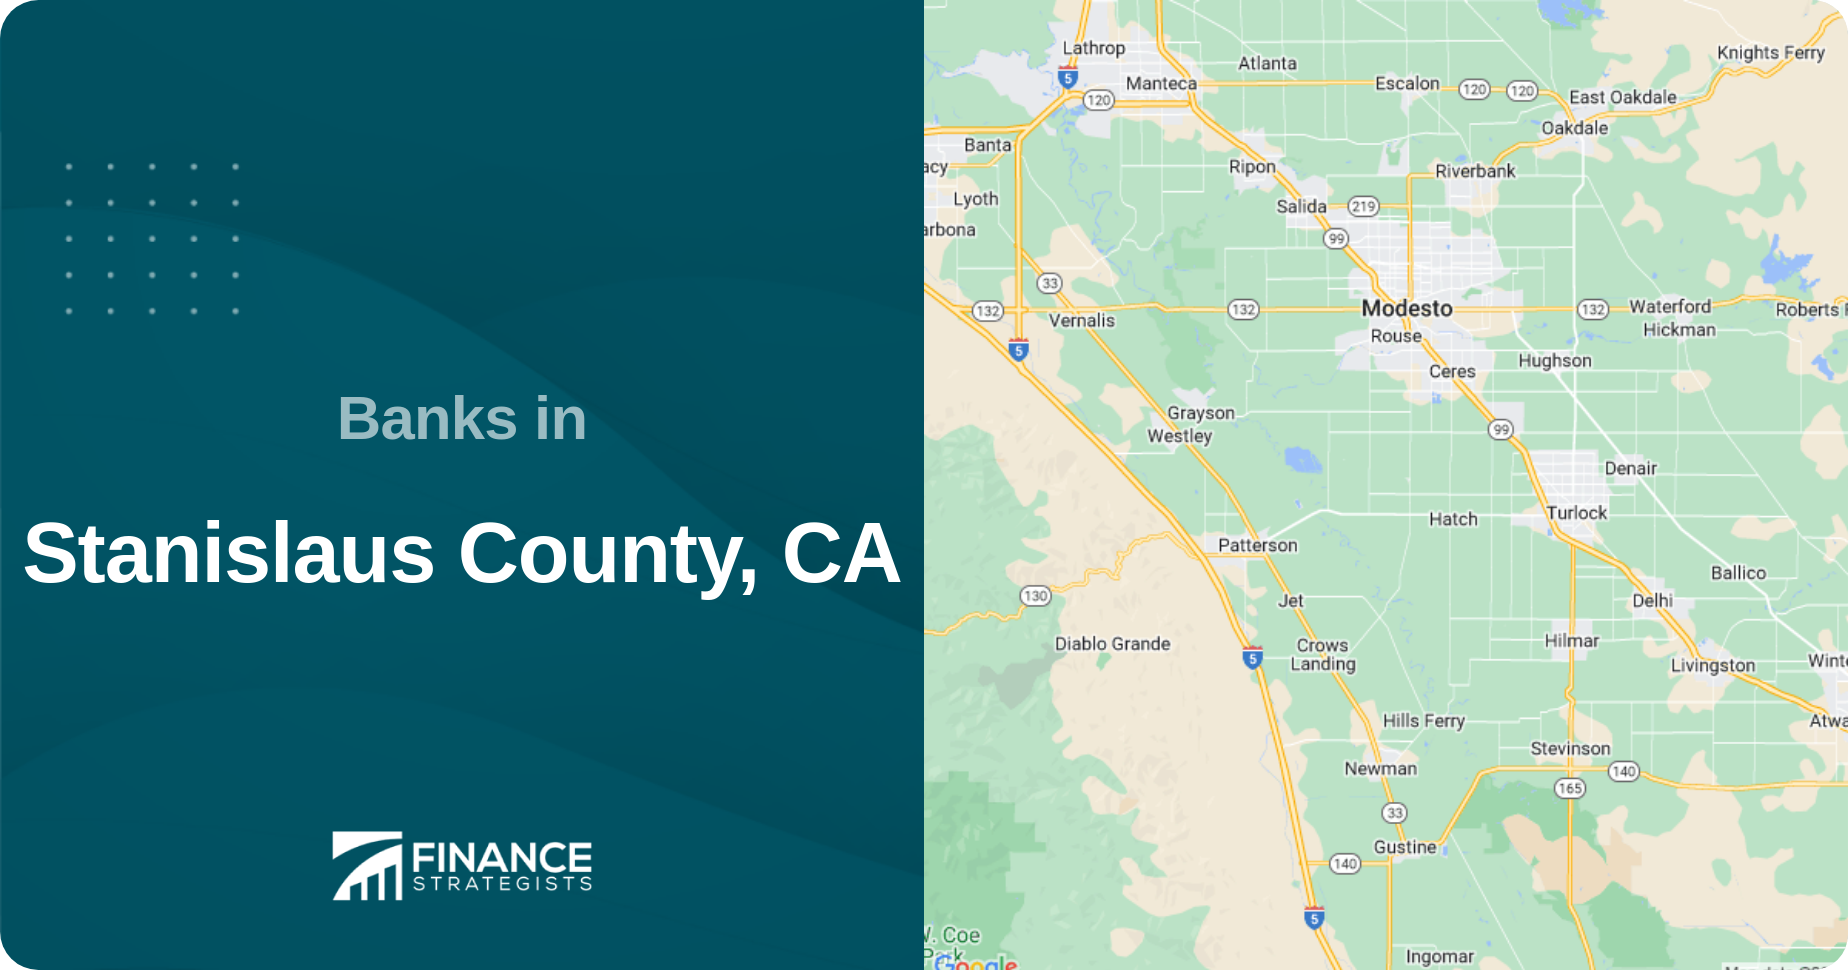 Banks in Stanislaus County, CA